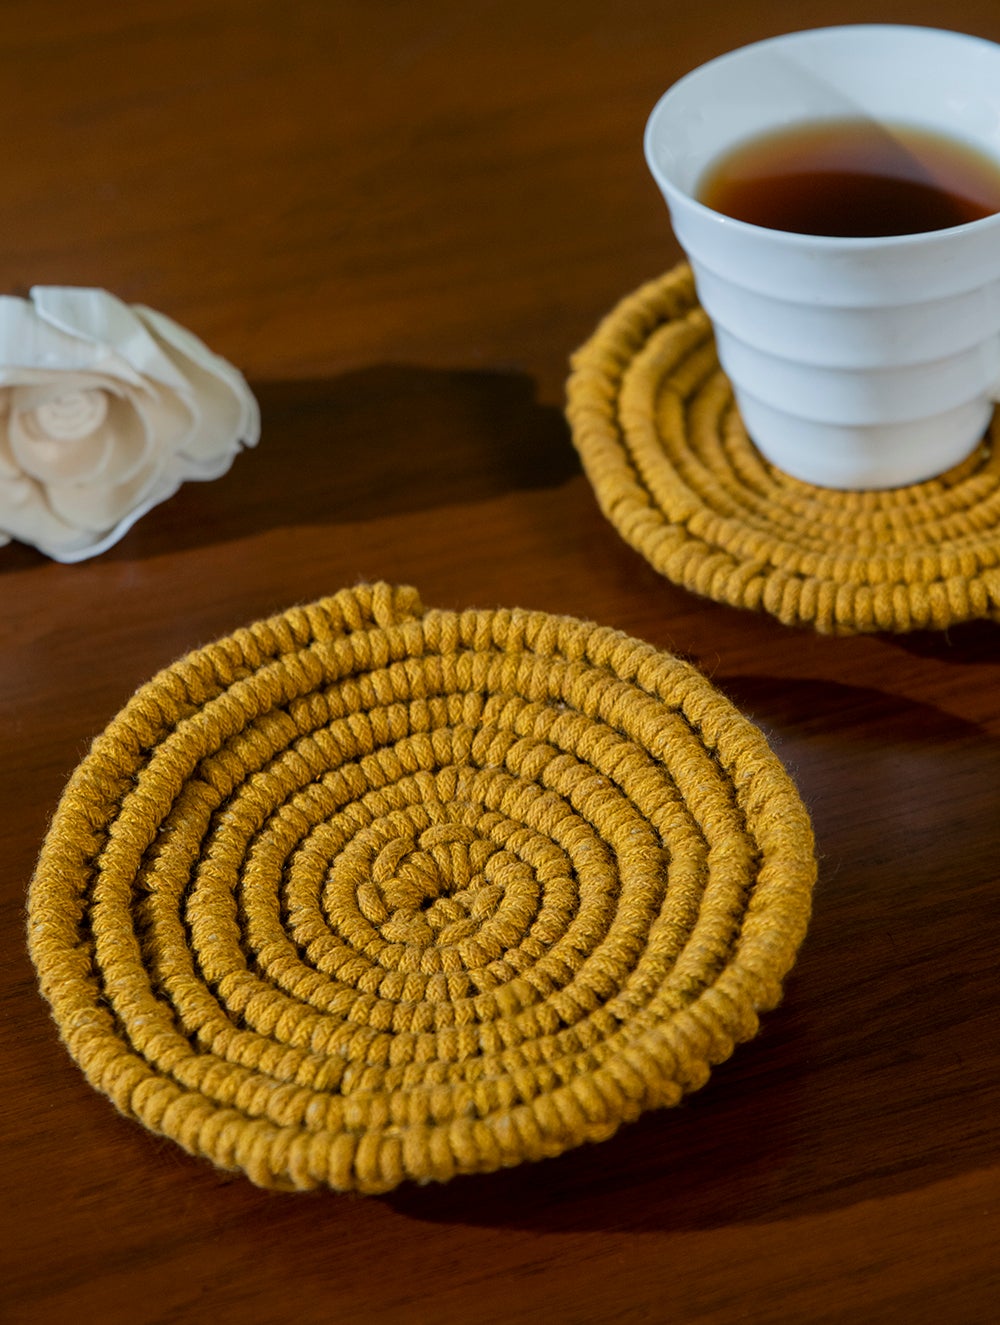 Load image into Gallery viewer, Classic Handknotted Macramé Coaster Sets / Trivets (Set of 2) - Mustard